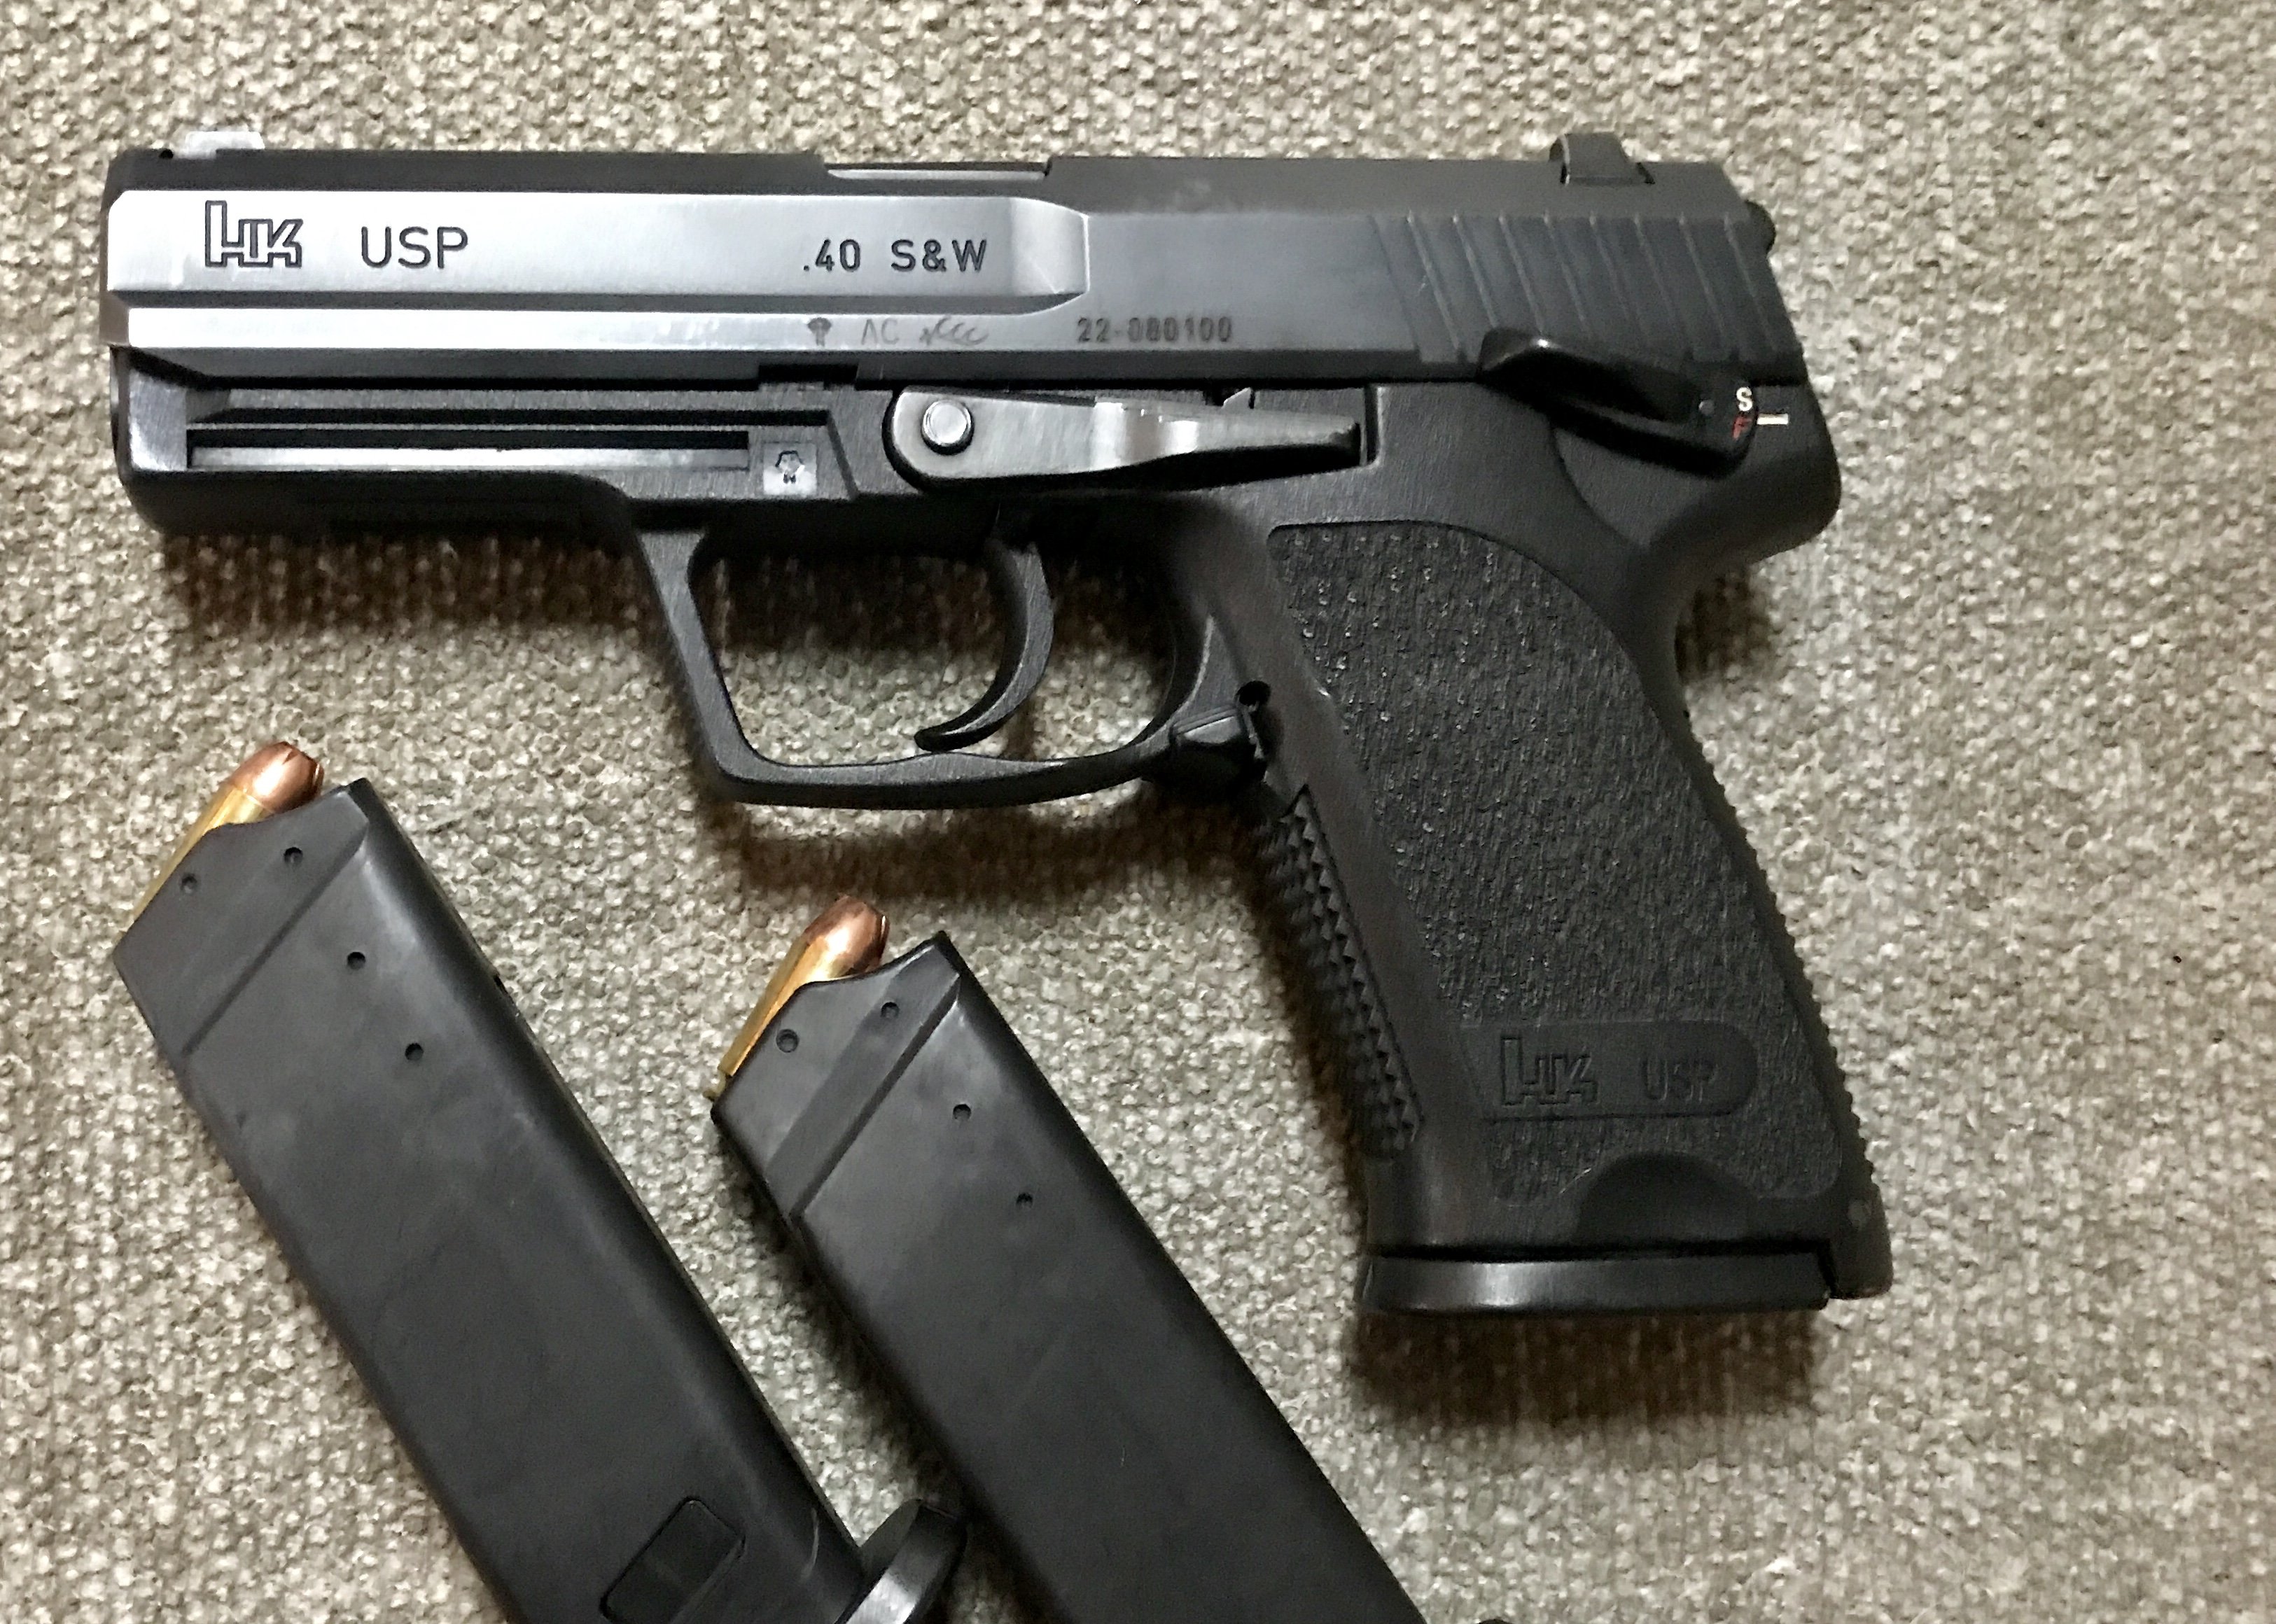 Howdy all. up for sale is an H&K USP 40 (40 cal). 